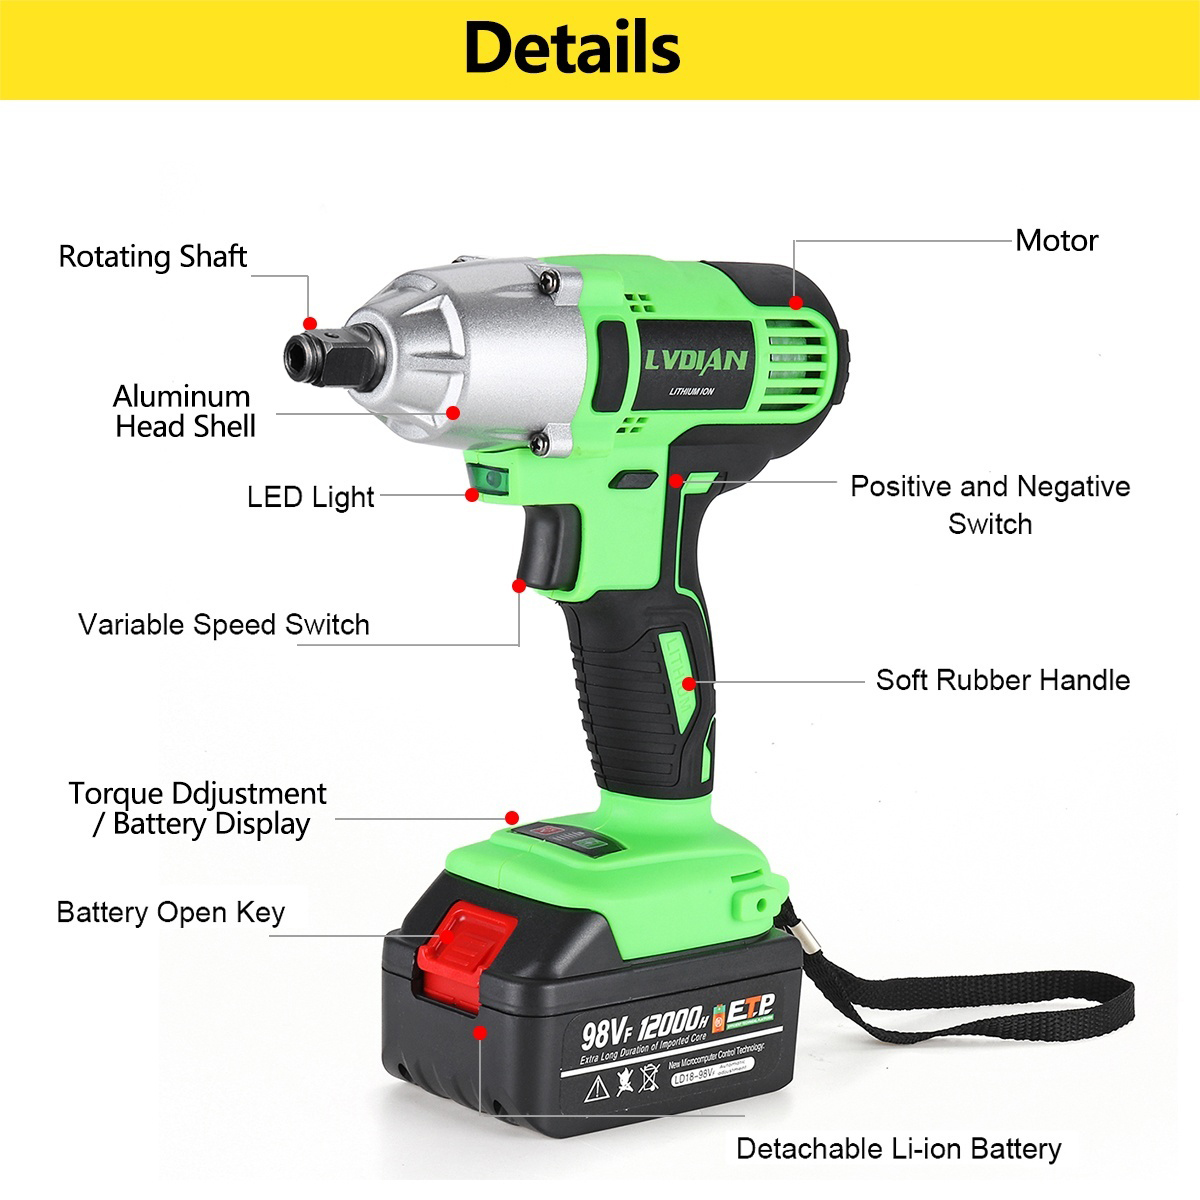 98VF-Brushless-Impact-Wrench-320Nm-Electric-Cordless-Rechargeable-Driver-Woodworking-Tools-1901190-7